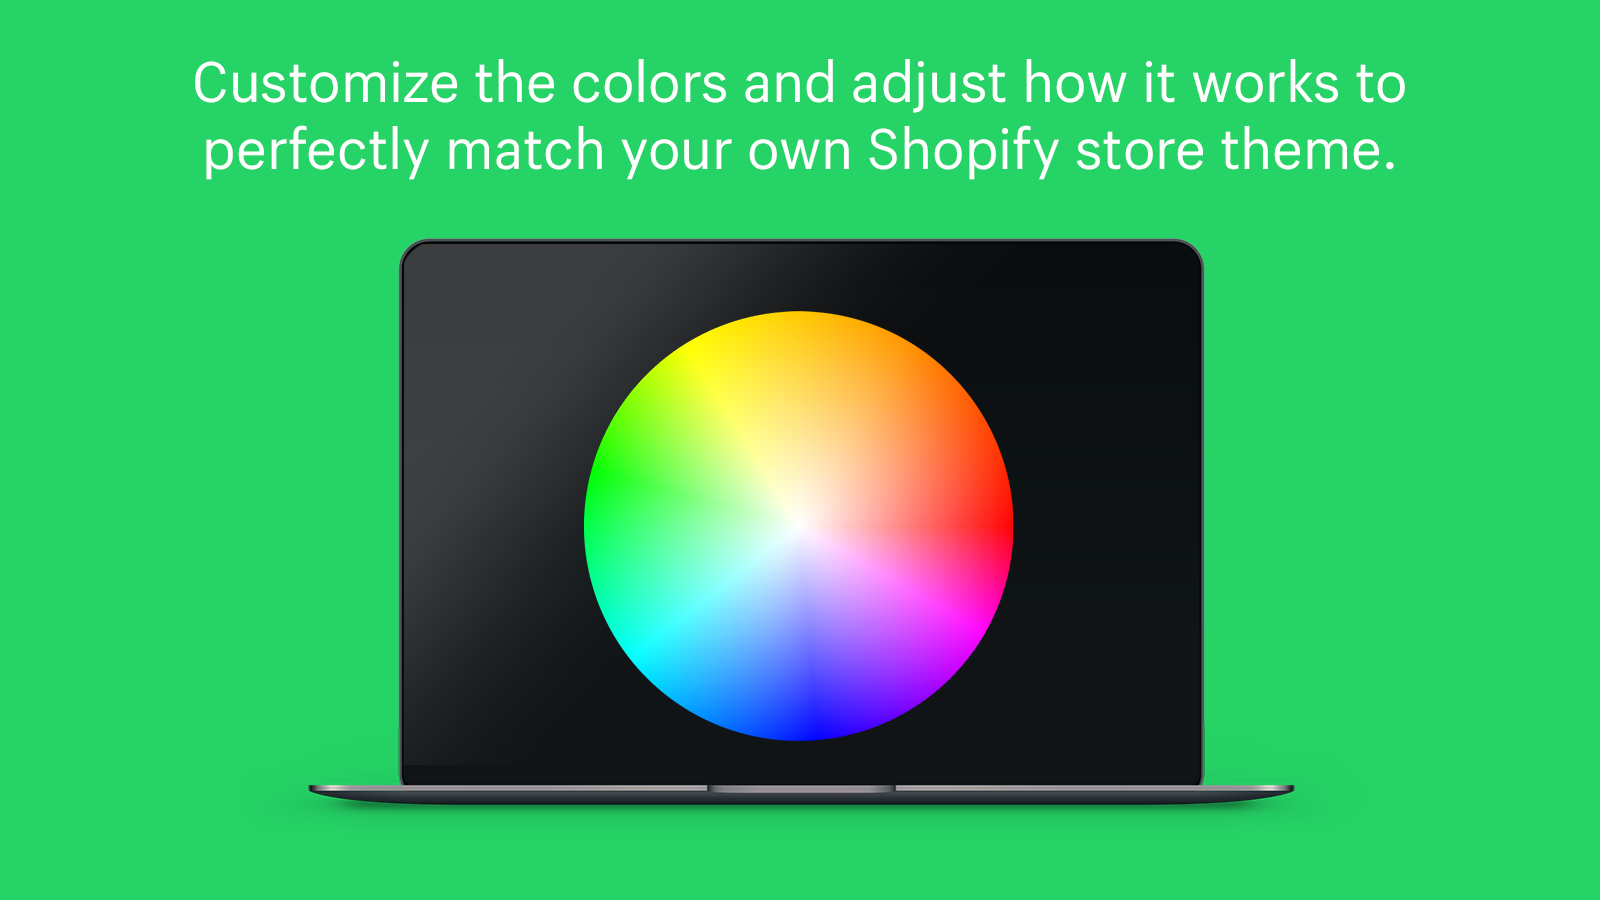 Customize colors and text to match your language & theme